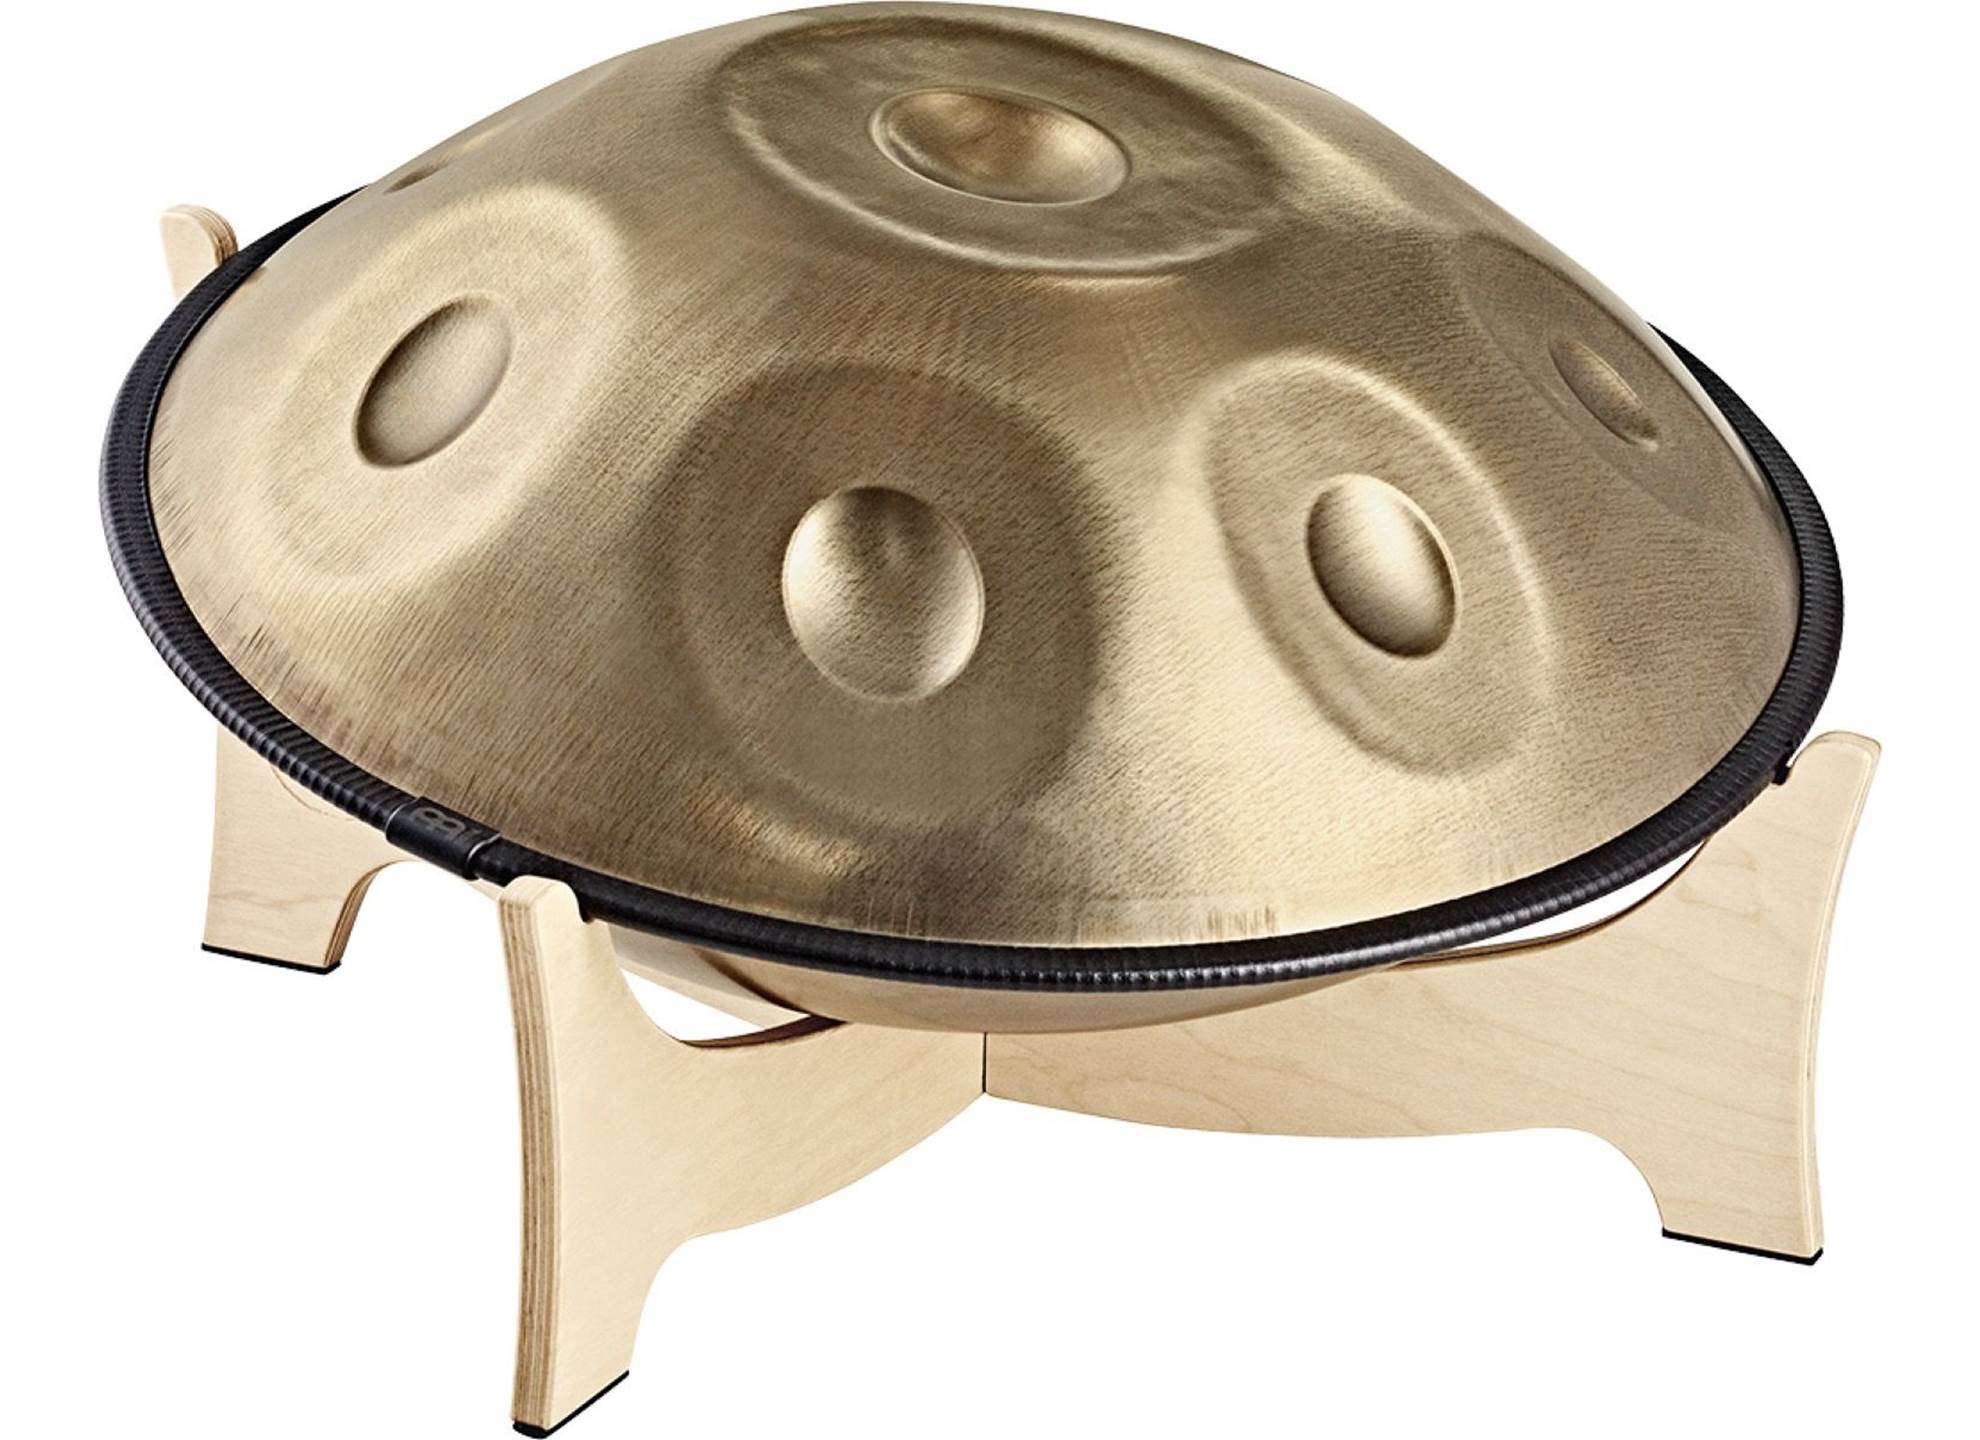 Inclined Wood Handpan Stand